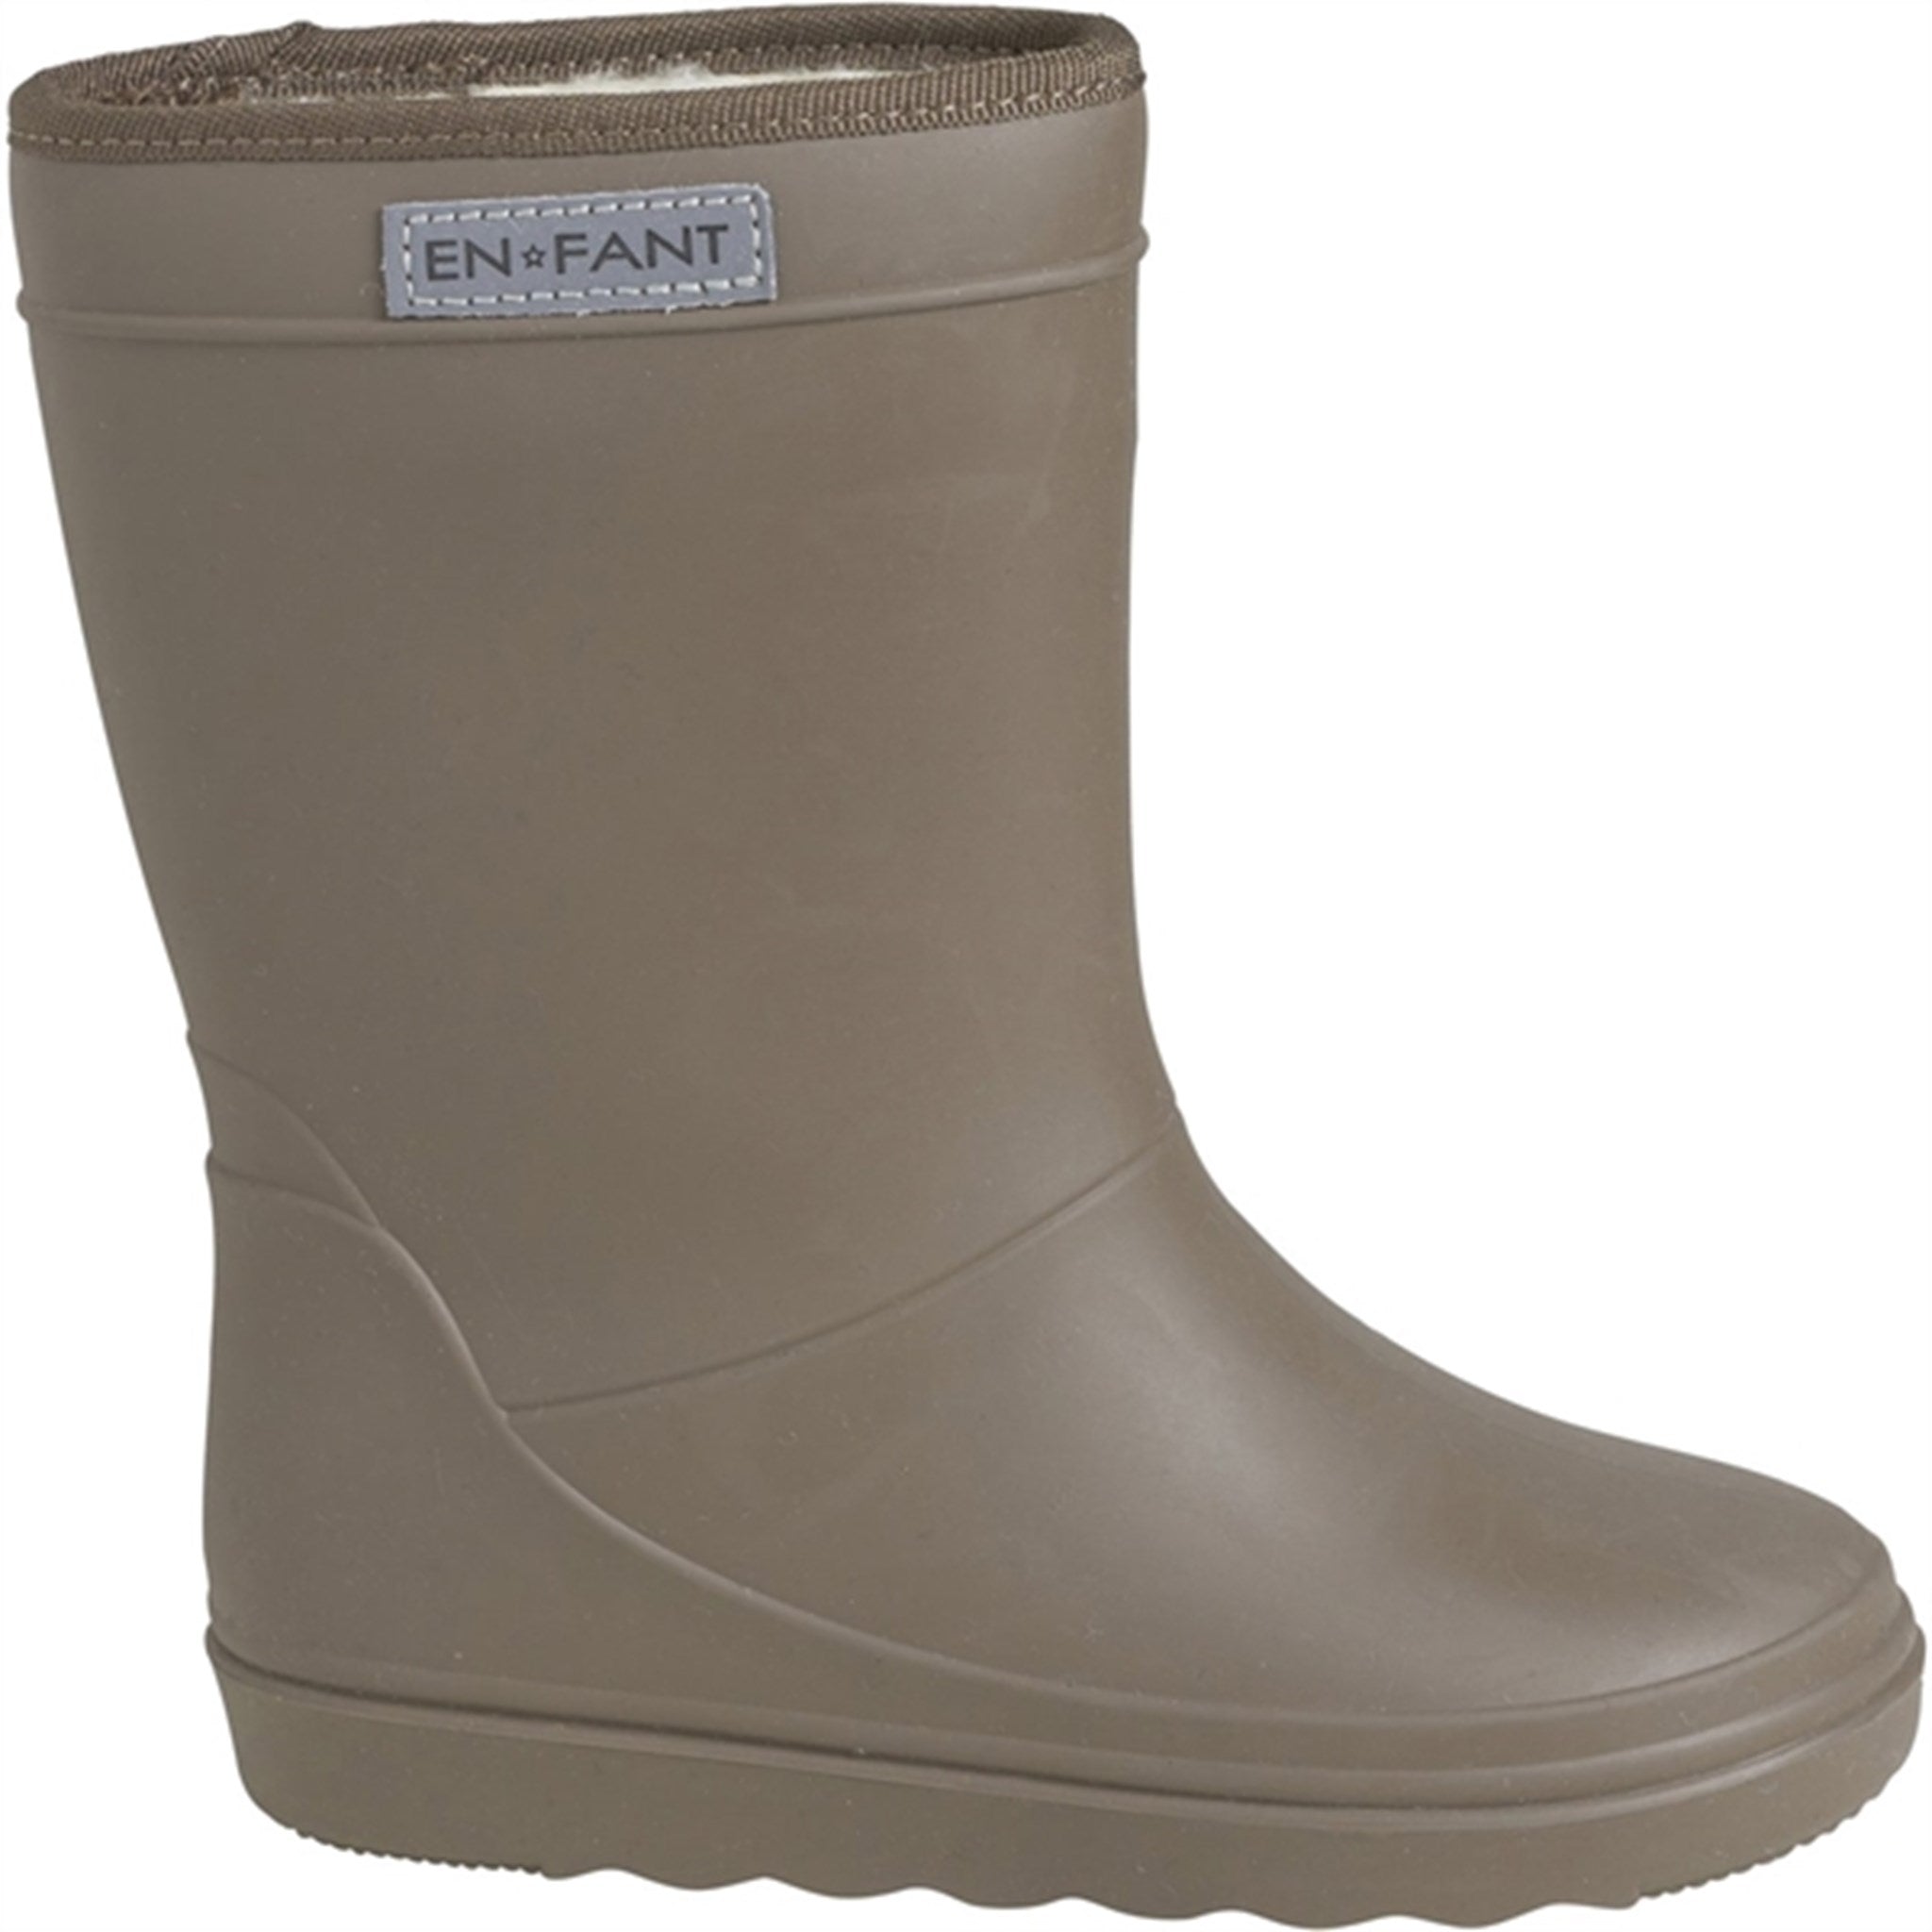 En Fant Thermo Boots Chocolate Chip 4